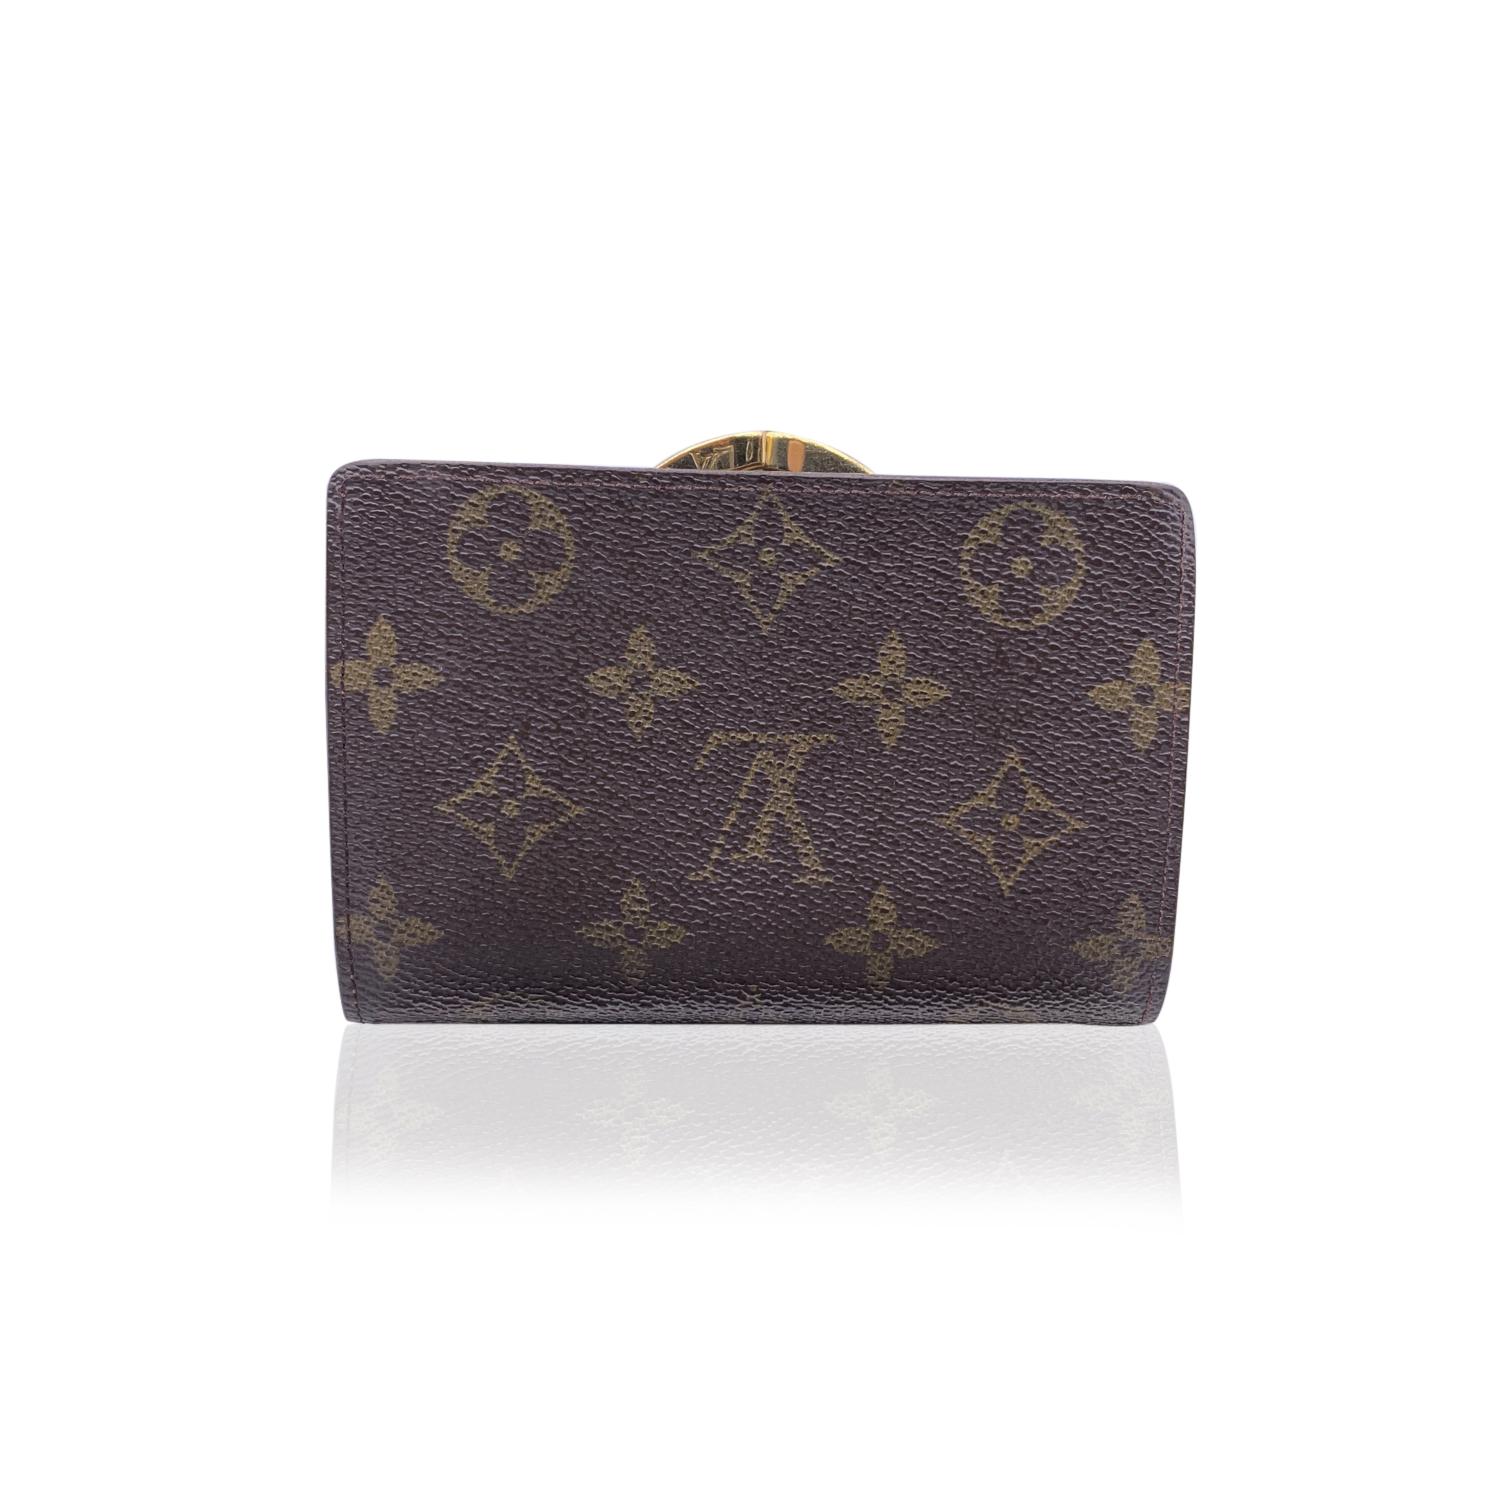 Louis Vuitton vintage brown monogram canvas Viennois wallet. It features 4 credit card slots, 2 open pocket, 1 coin compartment, 1 bill compartment. 'Louis Vuitton Paris - made in france' embossed inside. Authenticity serial number engraved inside